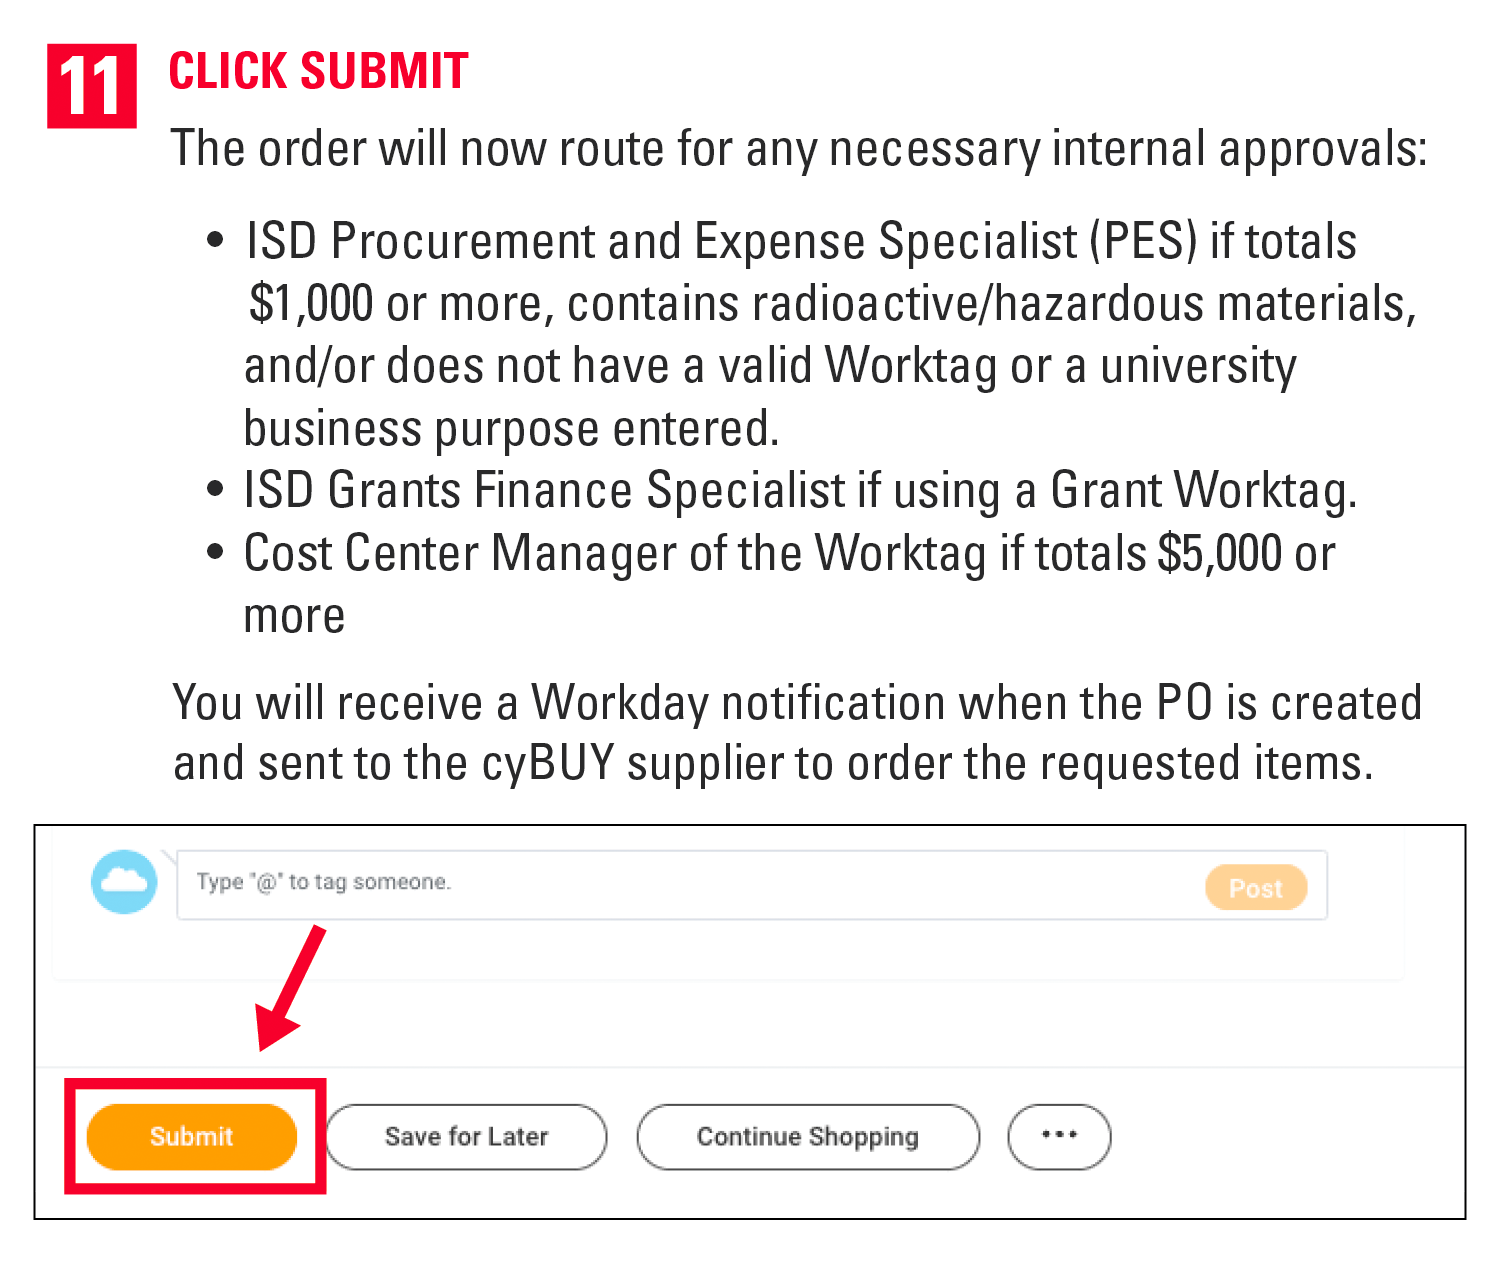 11. Click Submit. The order will now route for any necessary internal approvals: ISD Procurement and Expense Specialist (PES) if totals $1,000 or more, contains radioactive/hazardous materials, and/or does not have a valid Worktag or a university business purpose entered. ISD Grants Finance Specialist if using a Grant Worktag. Cost Center Manager of the Worktag if totals $5,000 or more   You will receive a Workday notification when the PO is created and sent to the cyBUY supplier to order the requested items.  